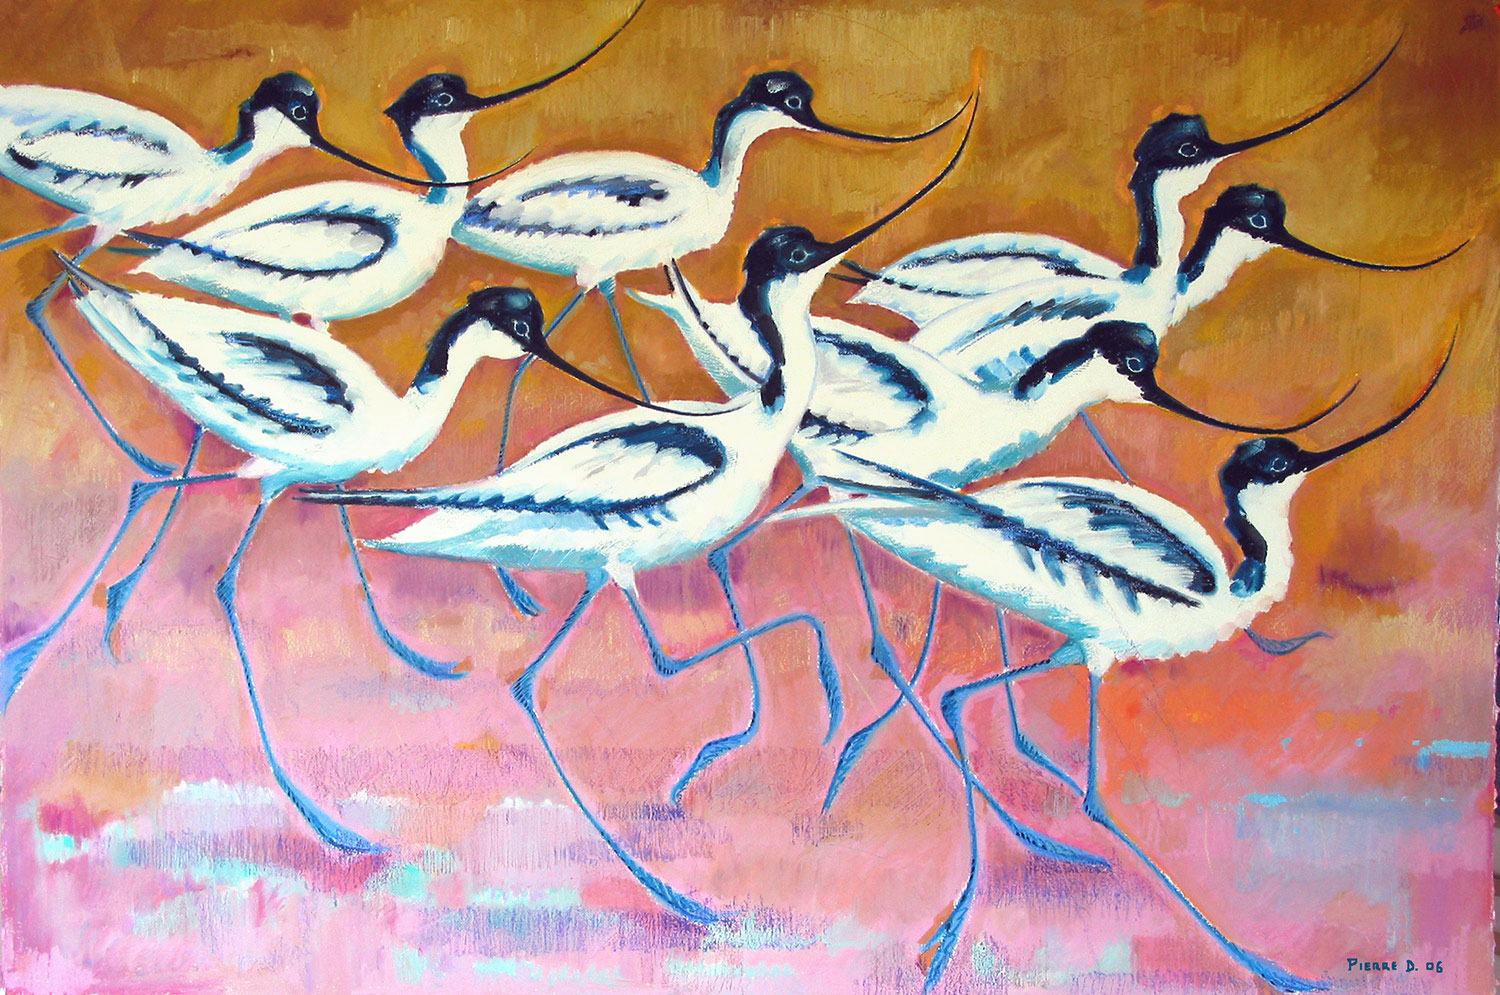  Avocets &nbsp; ©  Oil and oil pastels on fine paper  80 cm high x 120 cm wide 